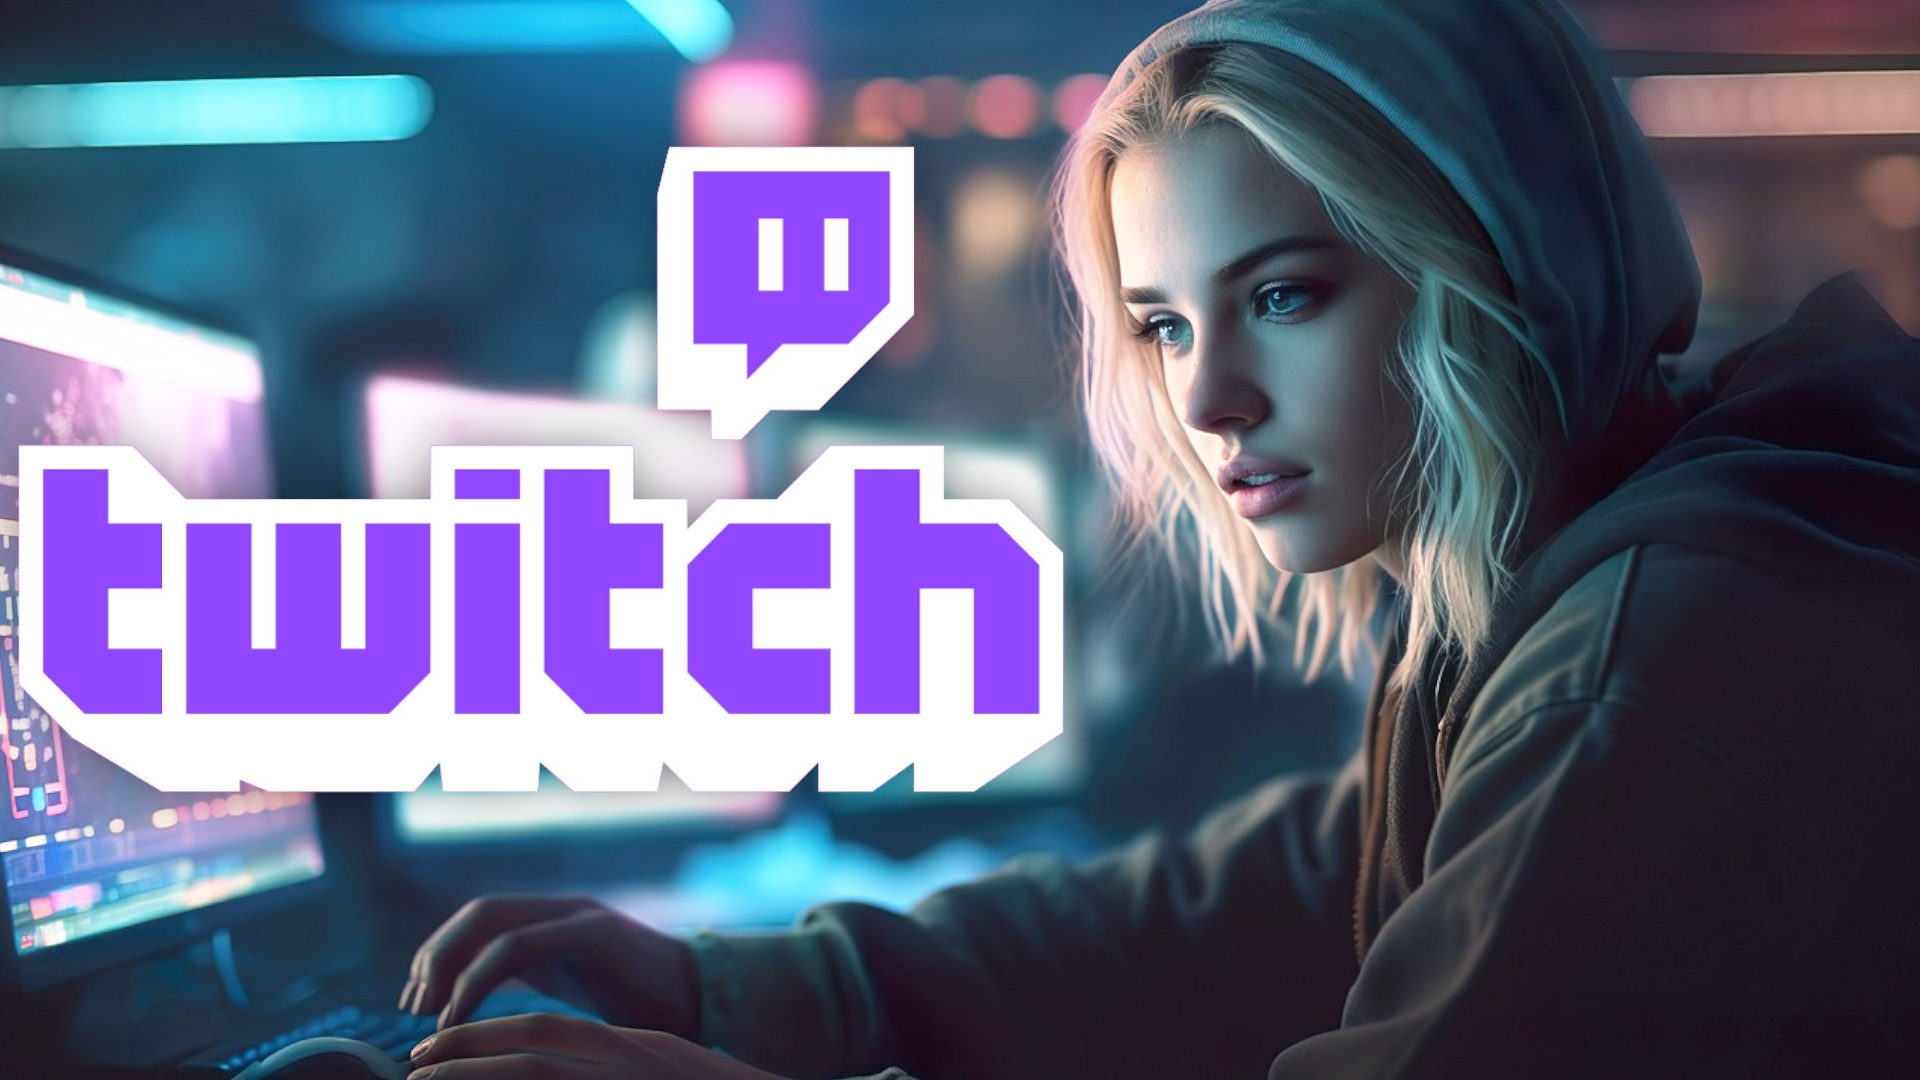 Streaming on Twitch will soon get a lot better thanks to new technology